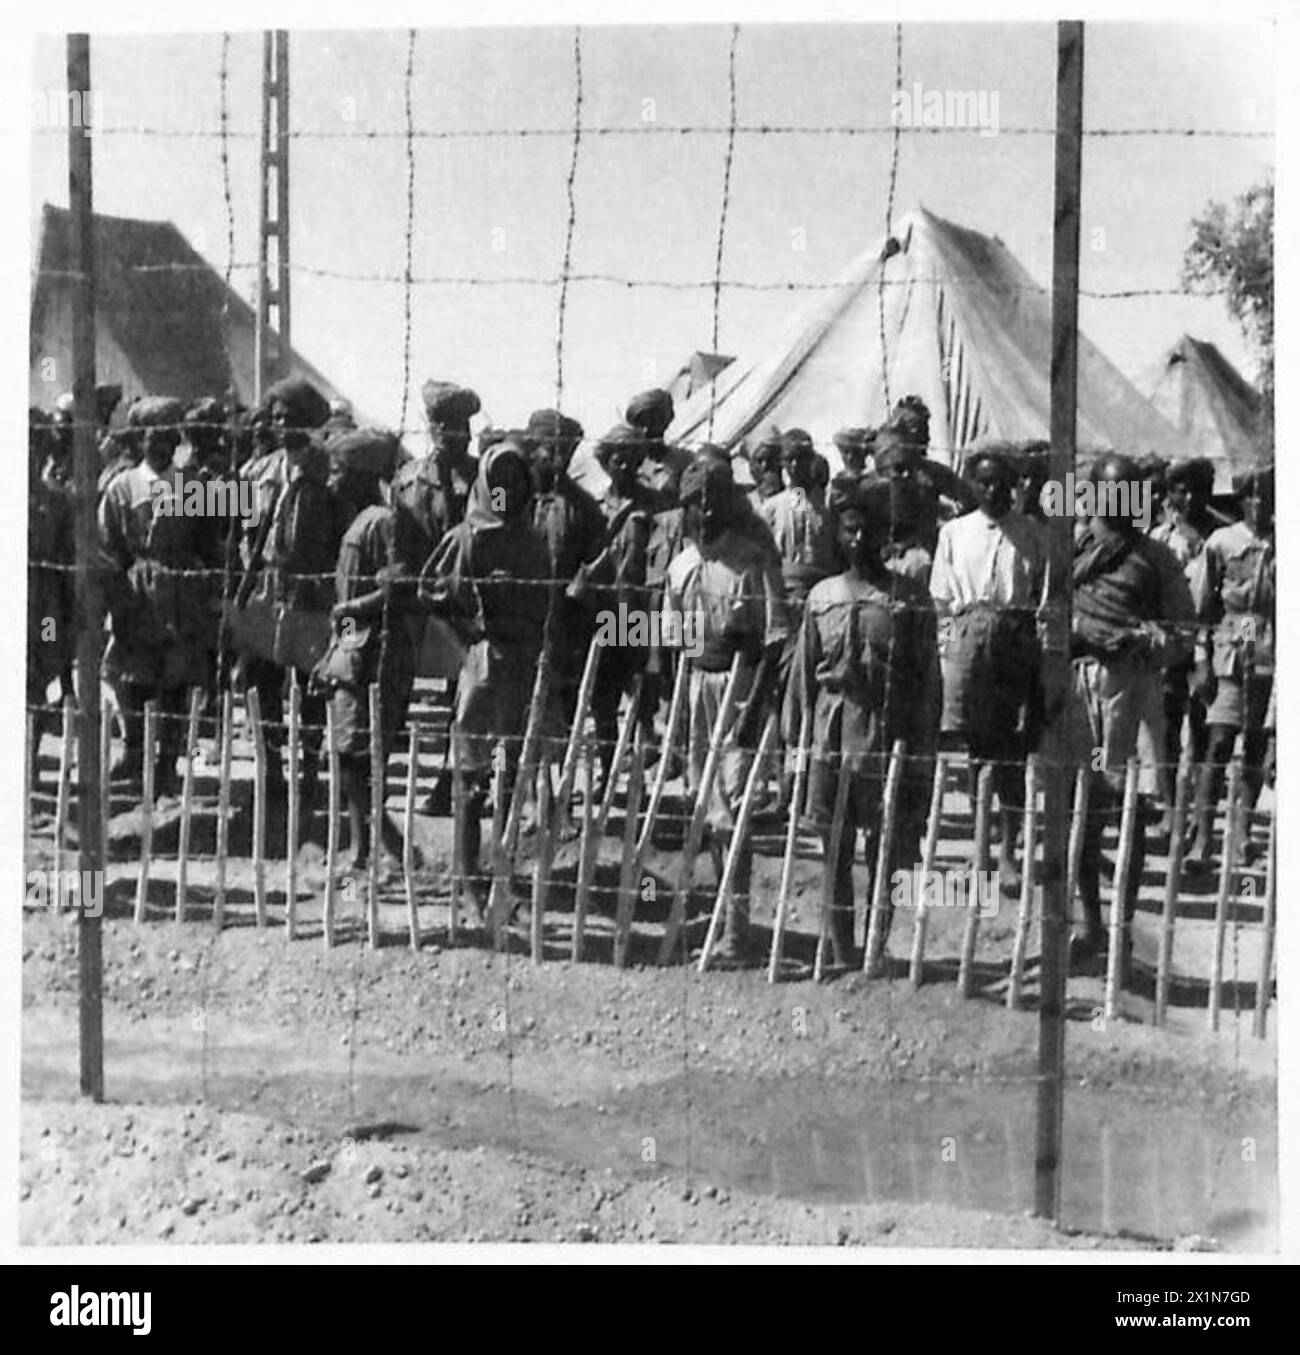 ETHIOPIAN WARRIORS AID BRITISH TROOPS - Fascist native auxiliaries captured by British patrols during our regular forays into Abyssinia. Altogether 300 of them, including Eritrean, Gallas and Abyssinian conscripts have been rounded up during our recent actions inside enemy territory. The prisoners shown in the pictures were captured on the Aroma and Kassala fronts, British Army Stock Photo